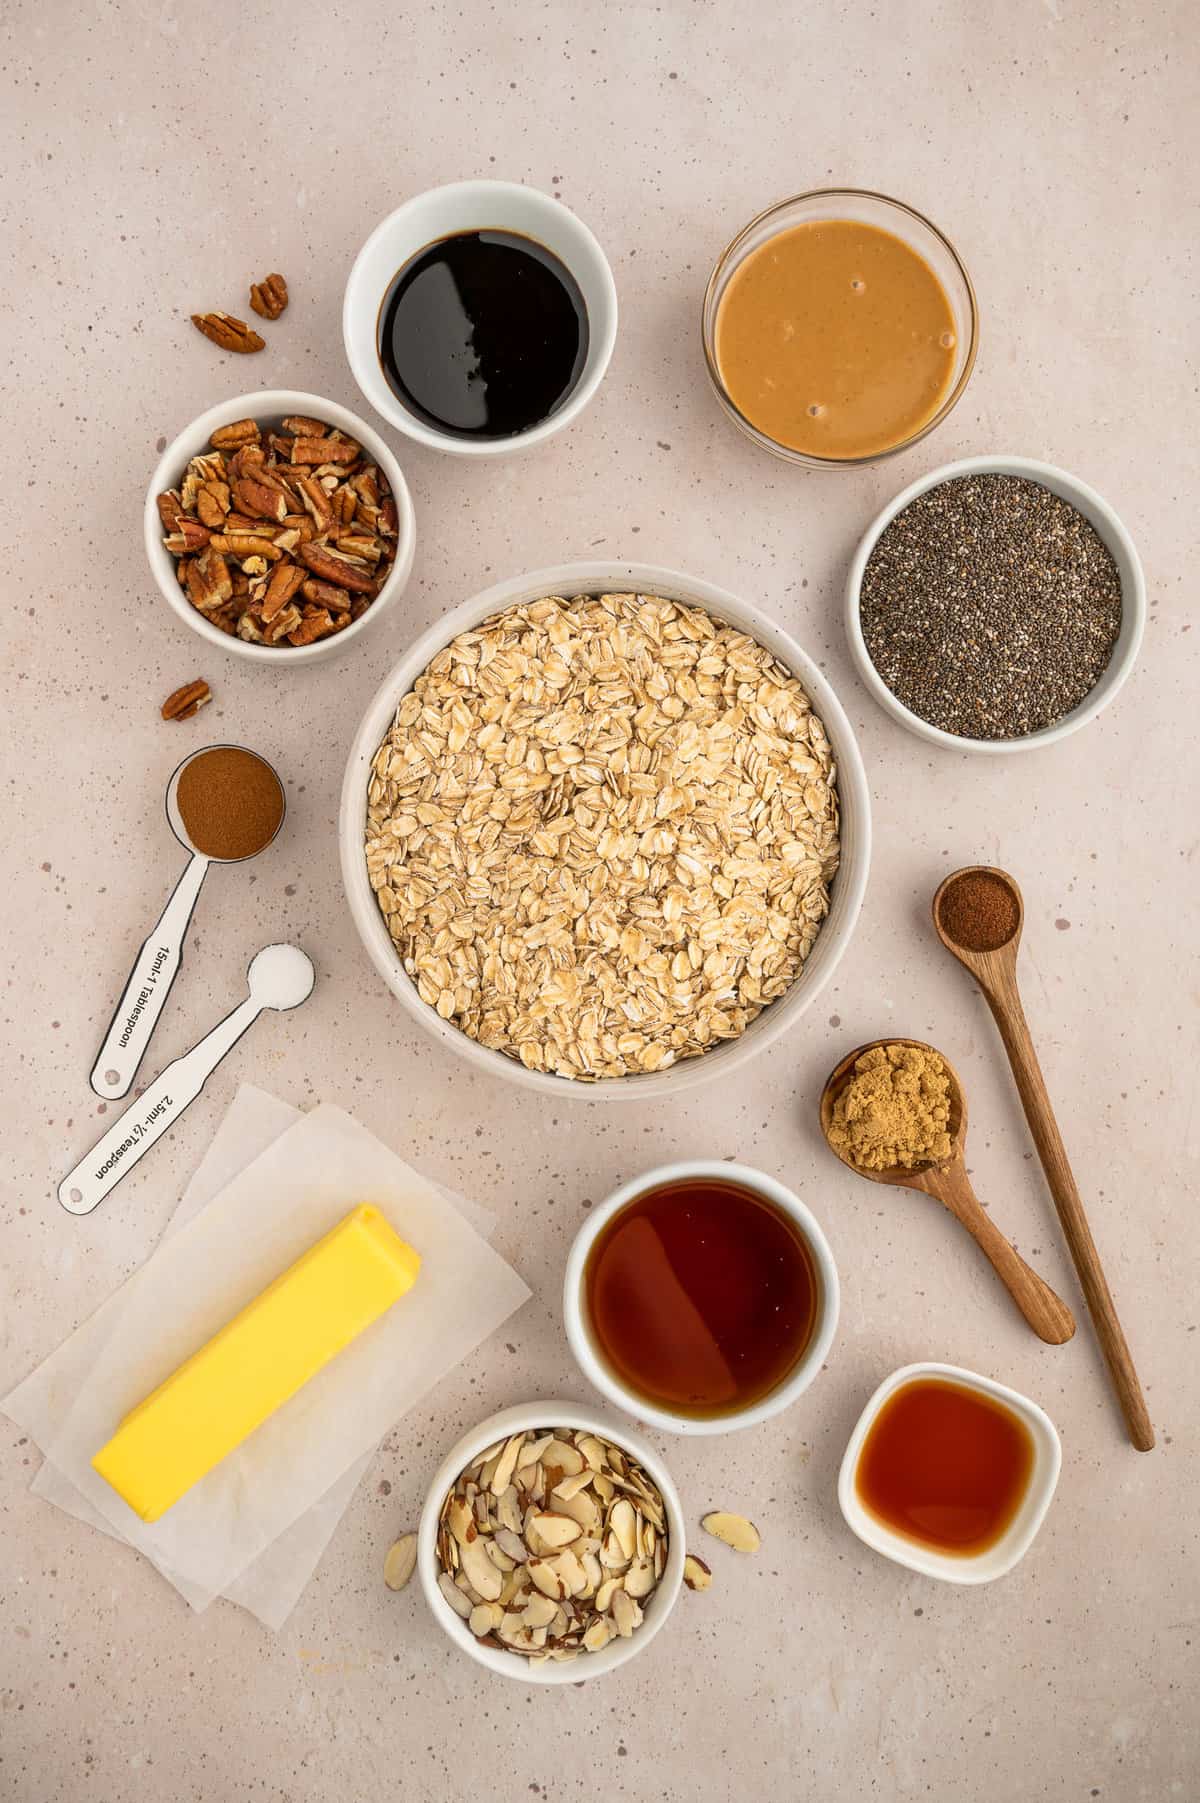 Ingredients needed for recipe.